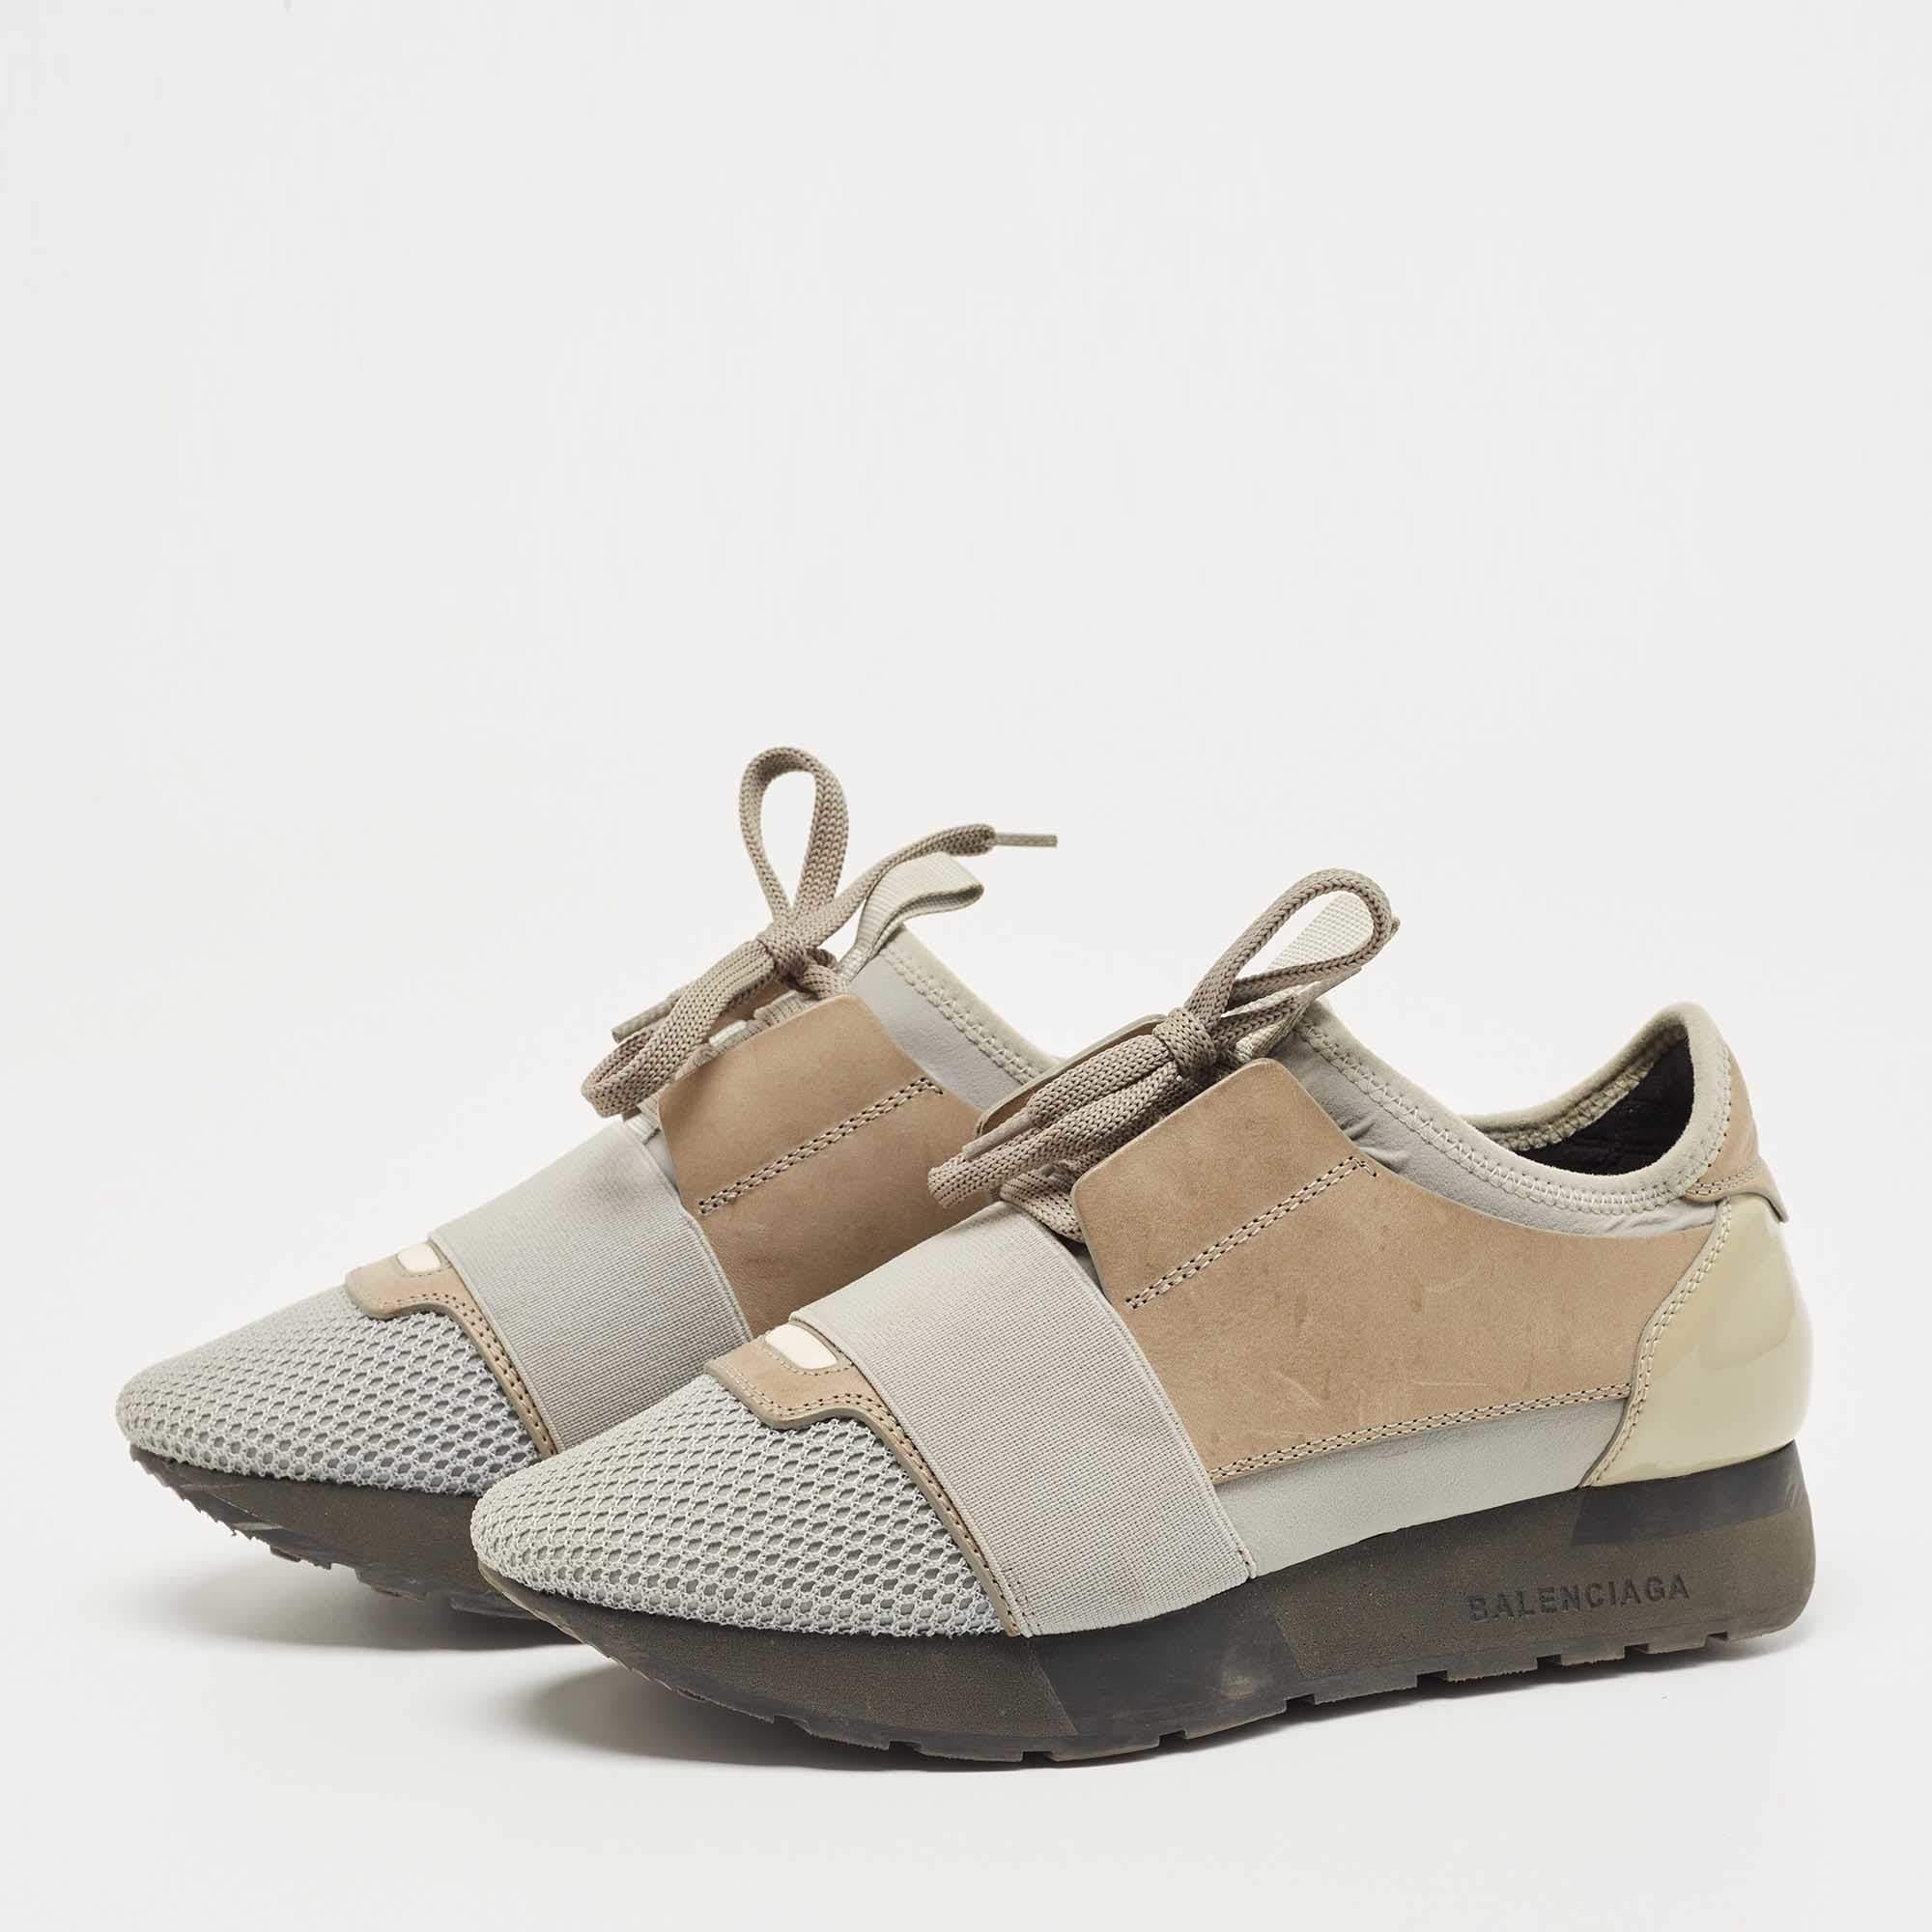 Let your latest addition be this pair of Race Runners sneakers from Balenciaga. Its exterior is crafted using leather as well as mesh with covered toes, strap detailing on the vamps, and lace-up fastenings. This pair is completed with a